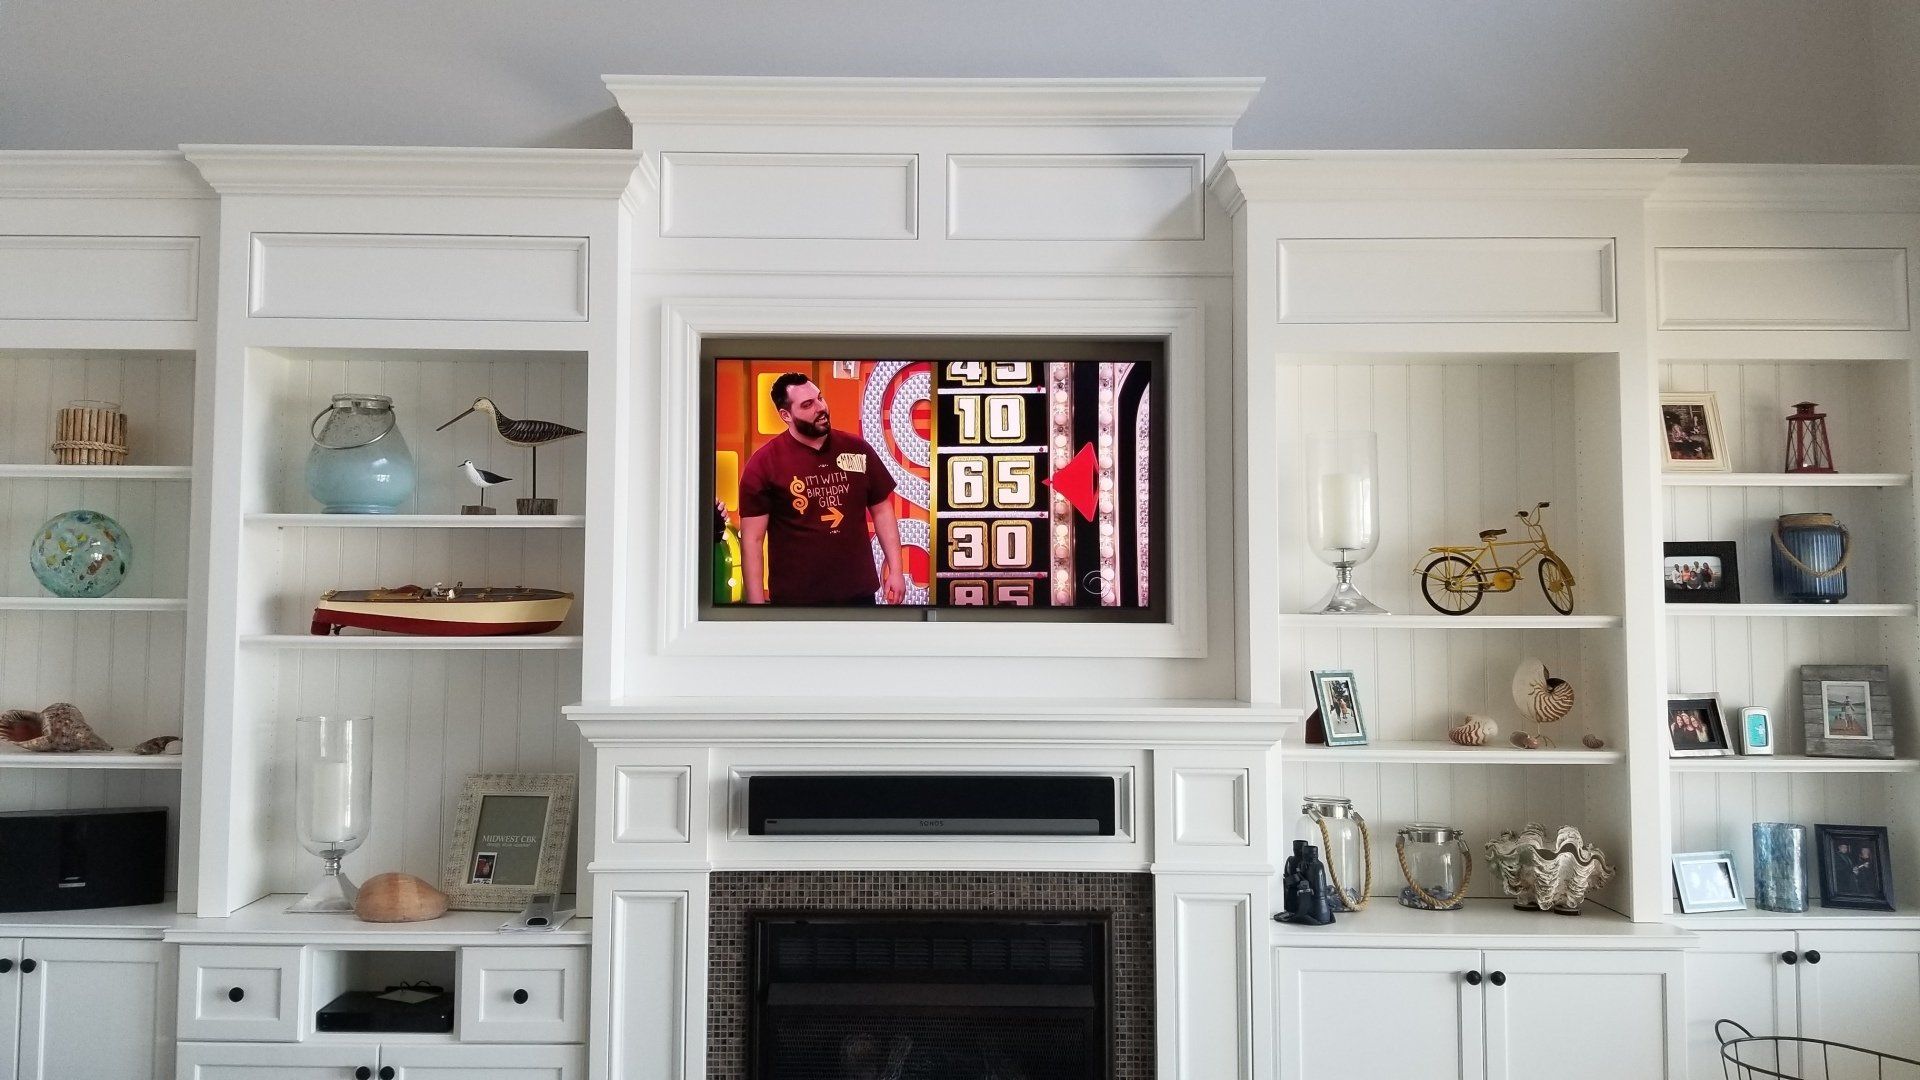 A television mounted above a fireplace with a sonos soundbar installed by fisher electronics in northern ohio.